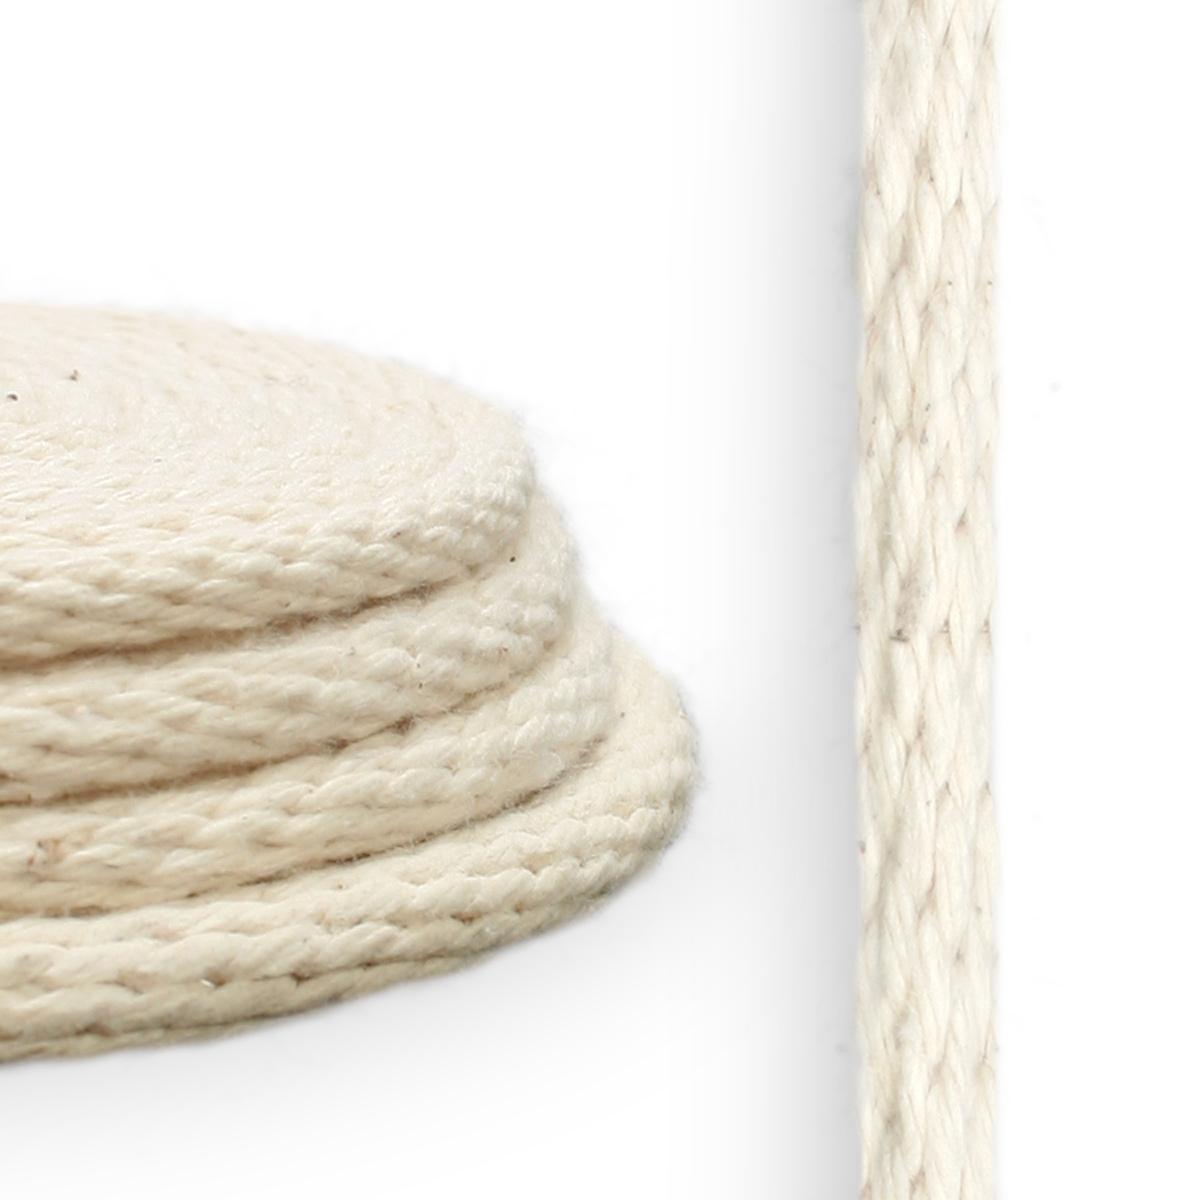 1/4 inch Cotton Rope Cut To Length By The Foot